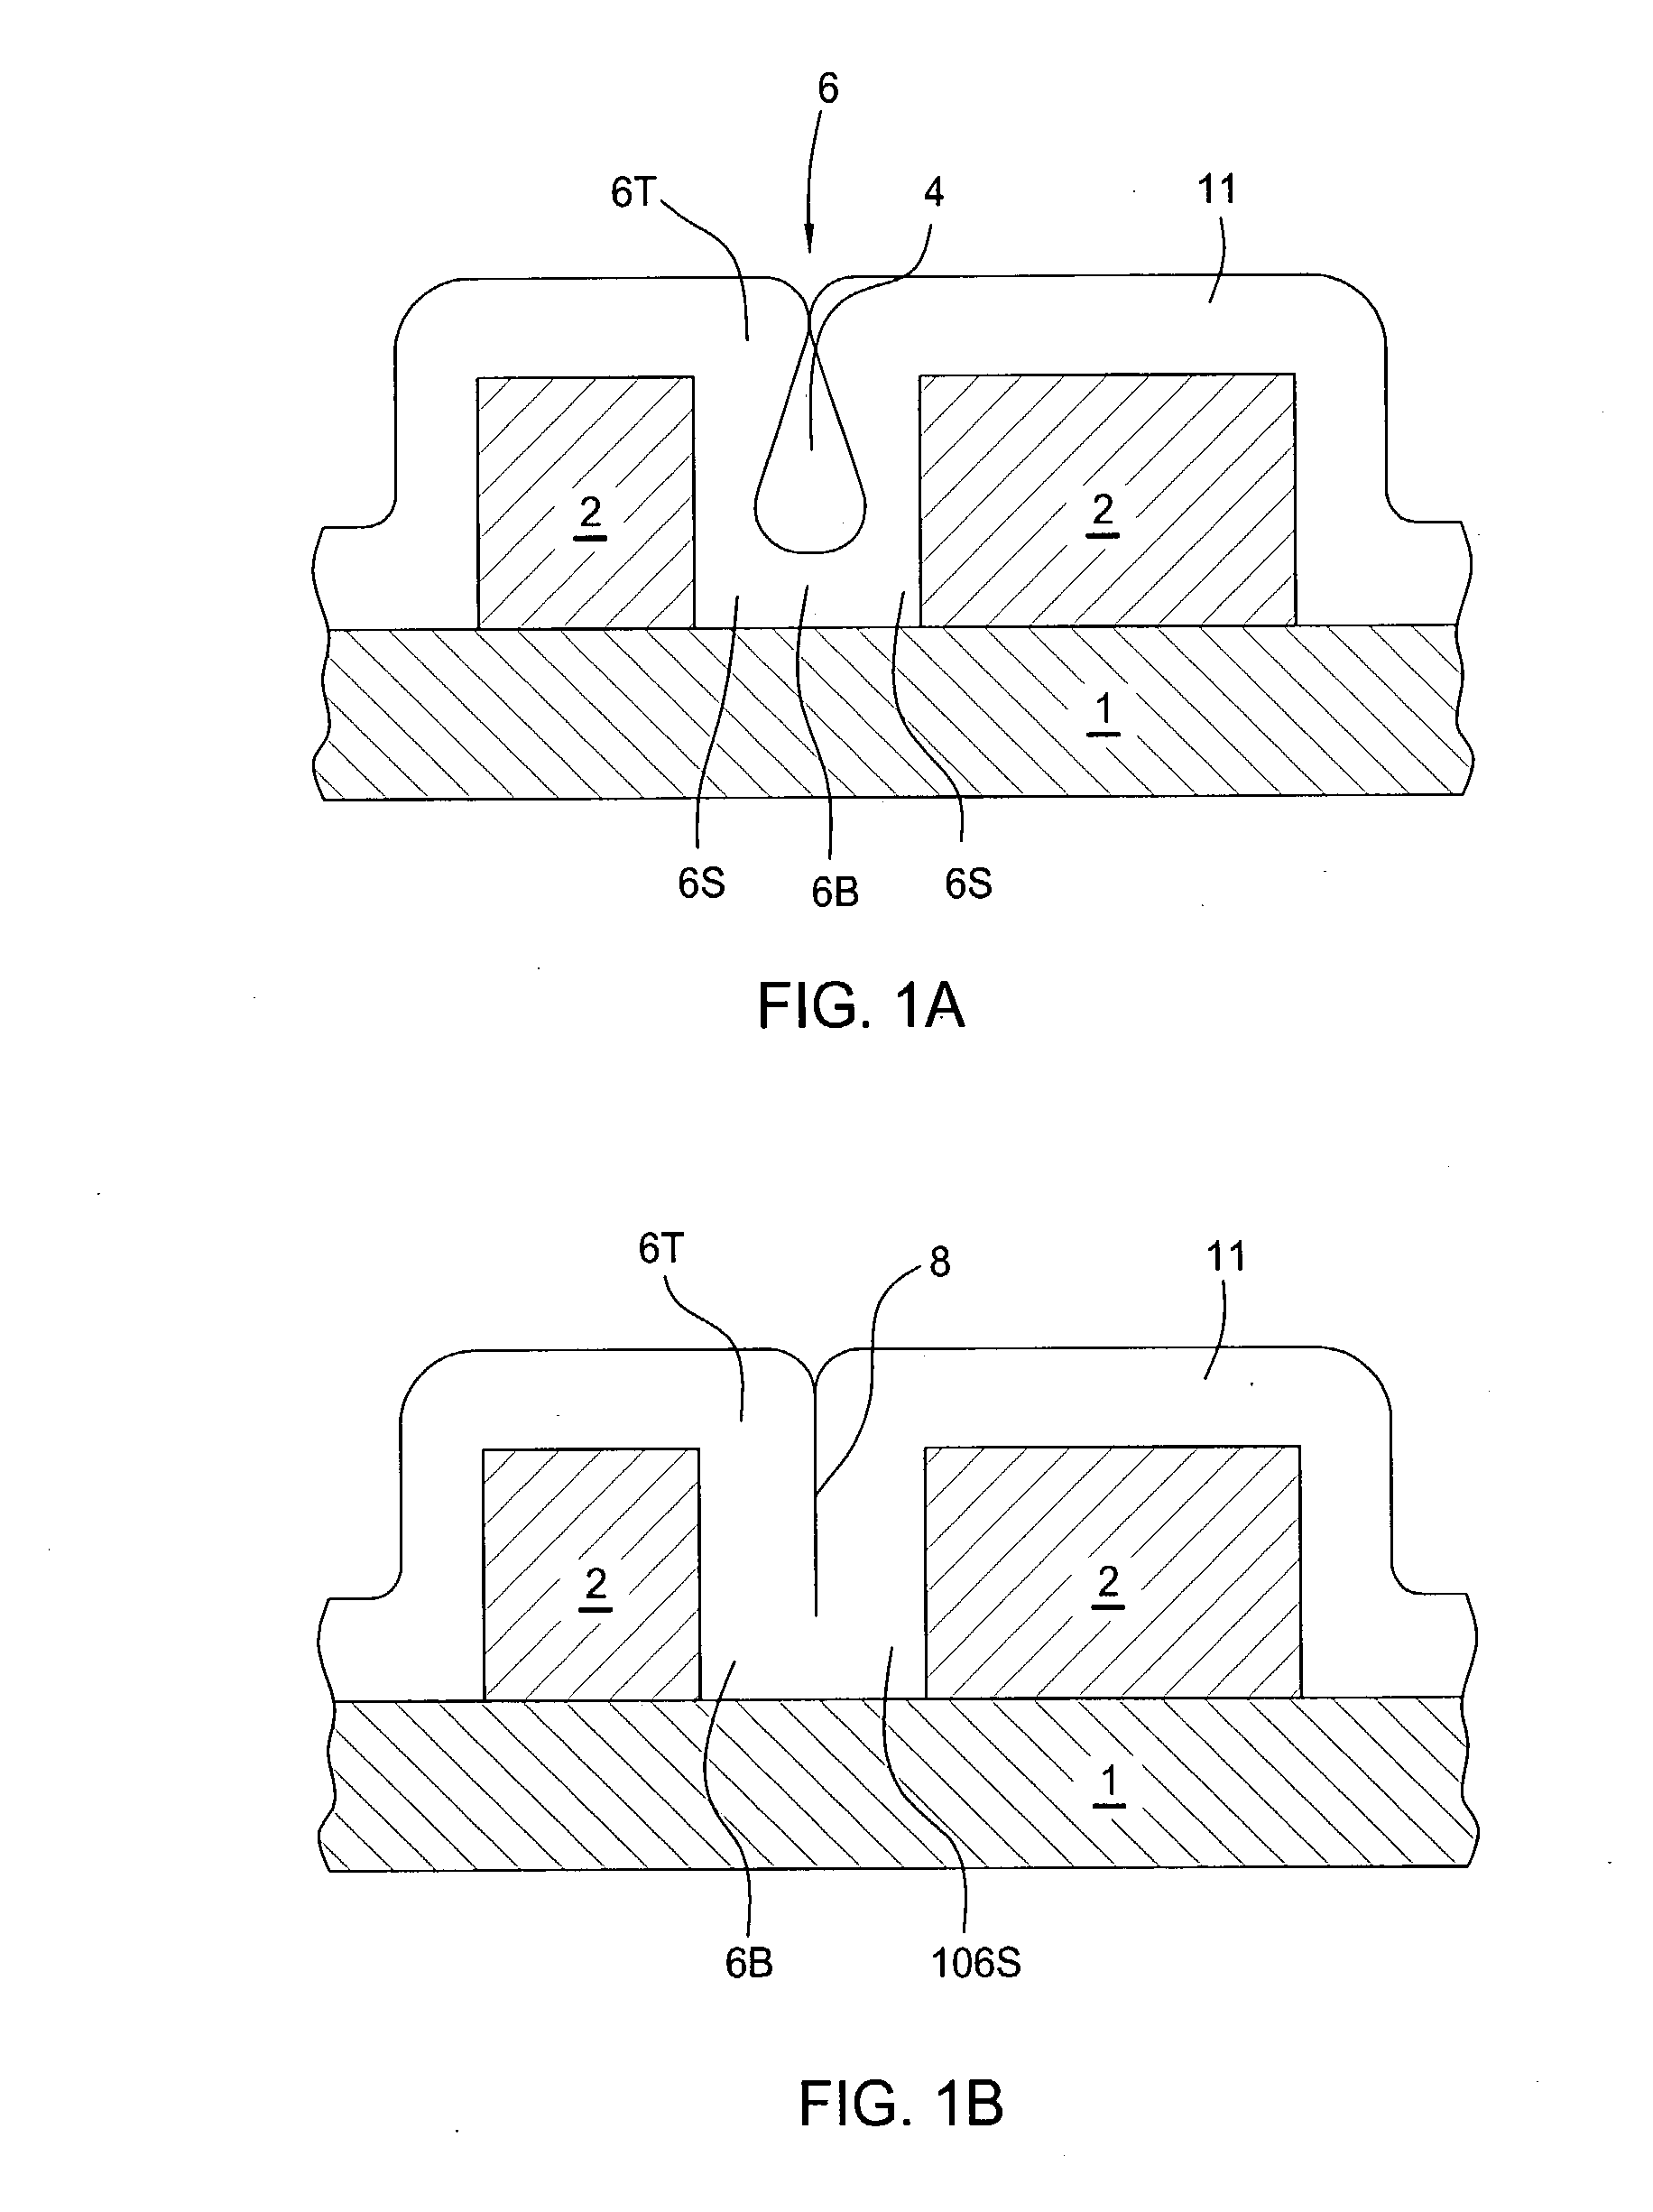 Formation of titanium nitride films using a cyclical deposition process